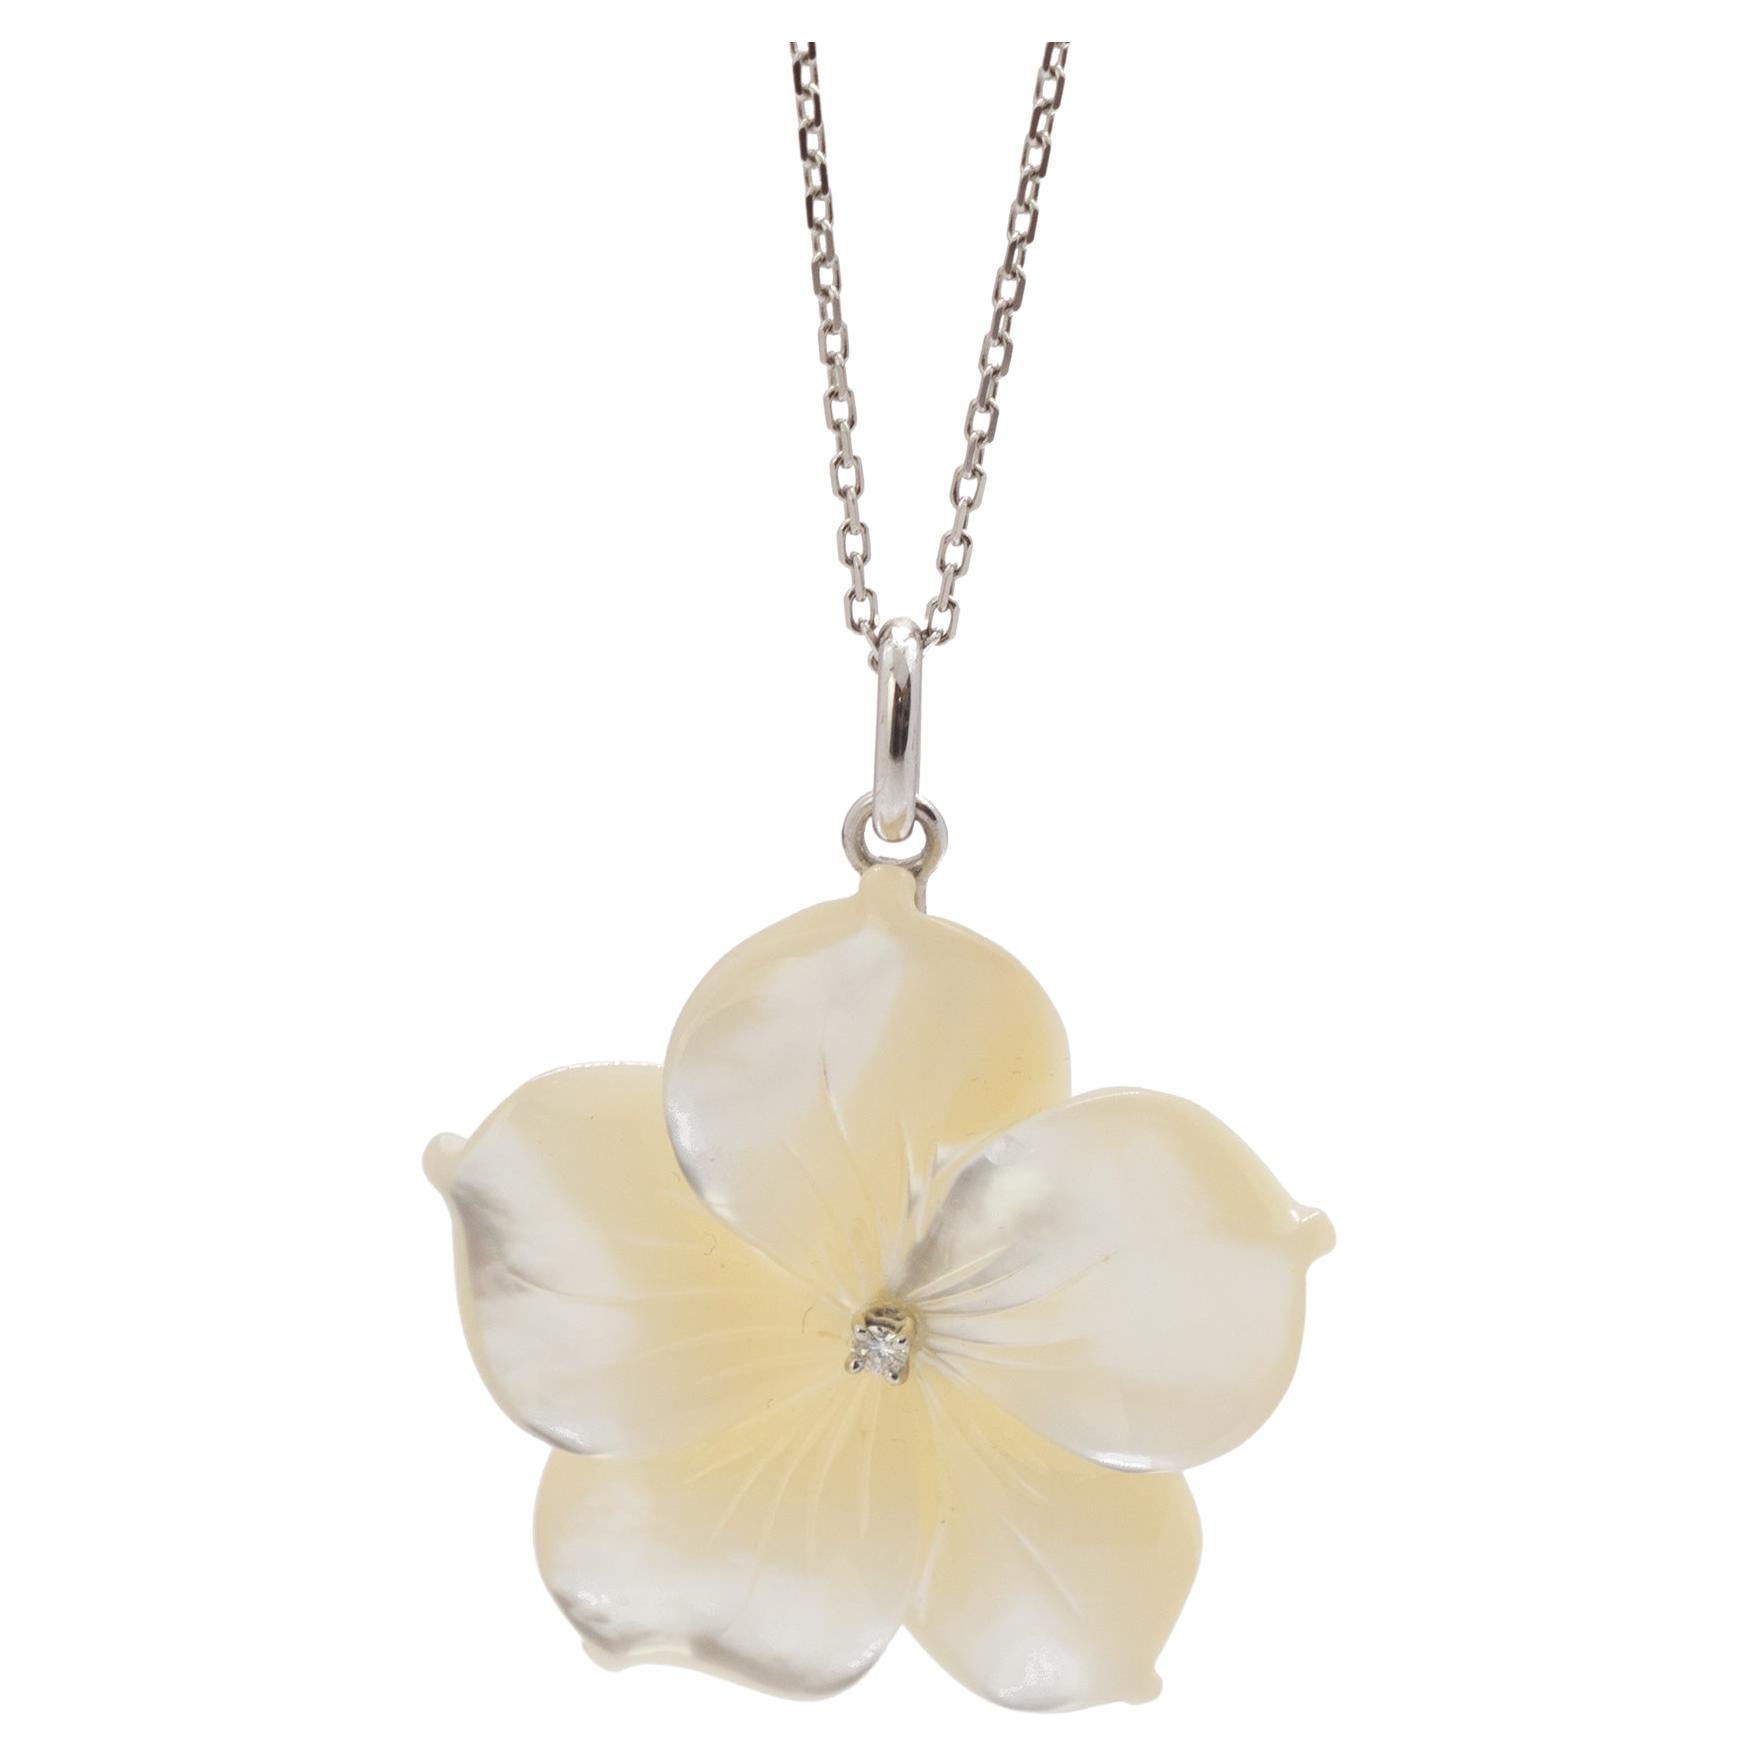 Vintage ivory white Large Mother of Pearl Flower Pendant Necklace 